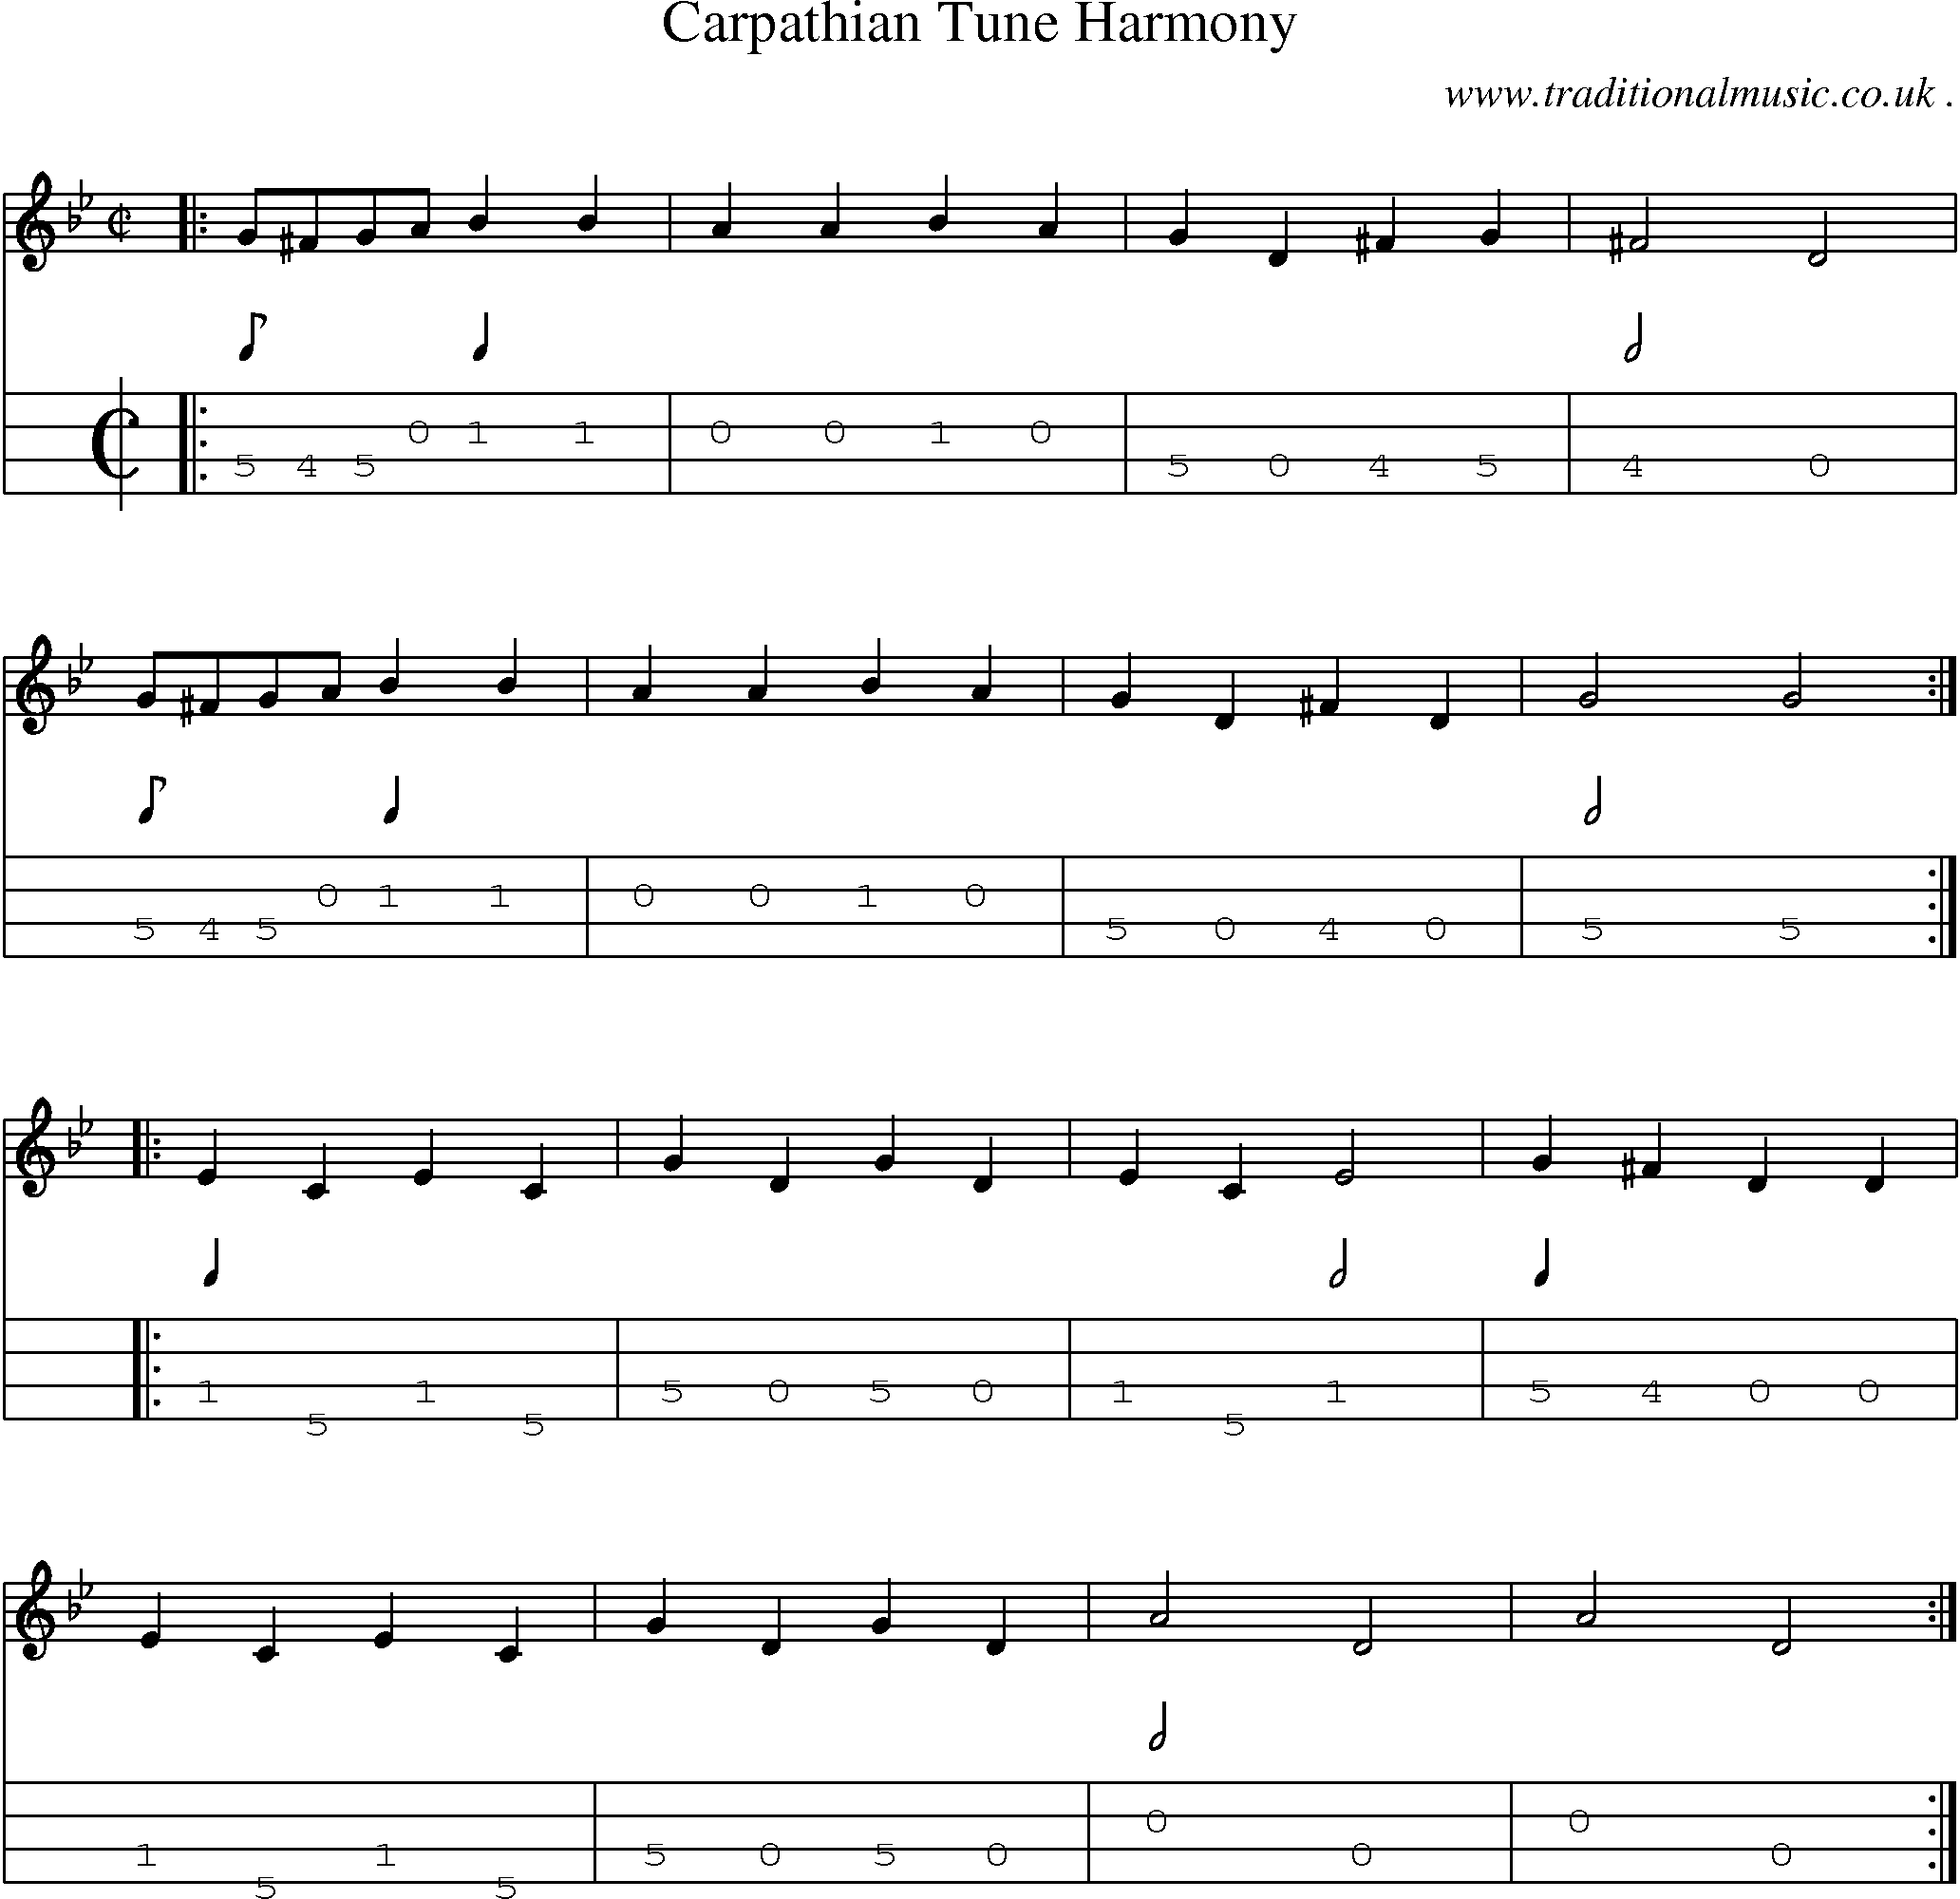 Music Score and Guitar Tabs for Carpathian Tune Harmony